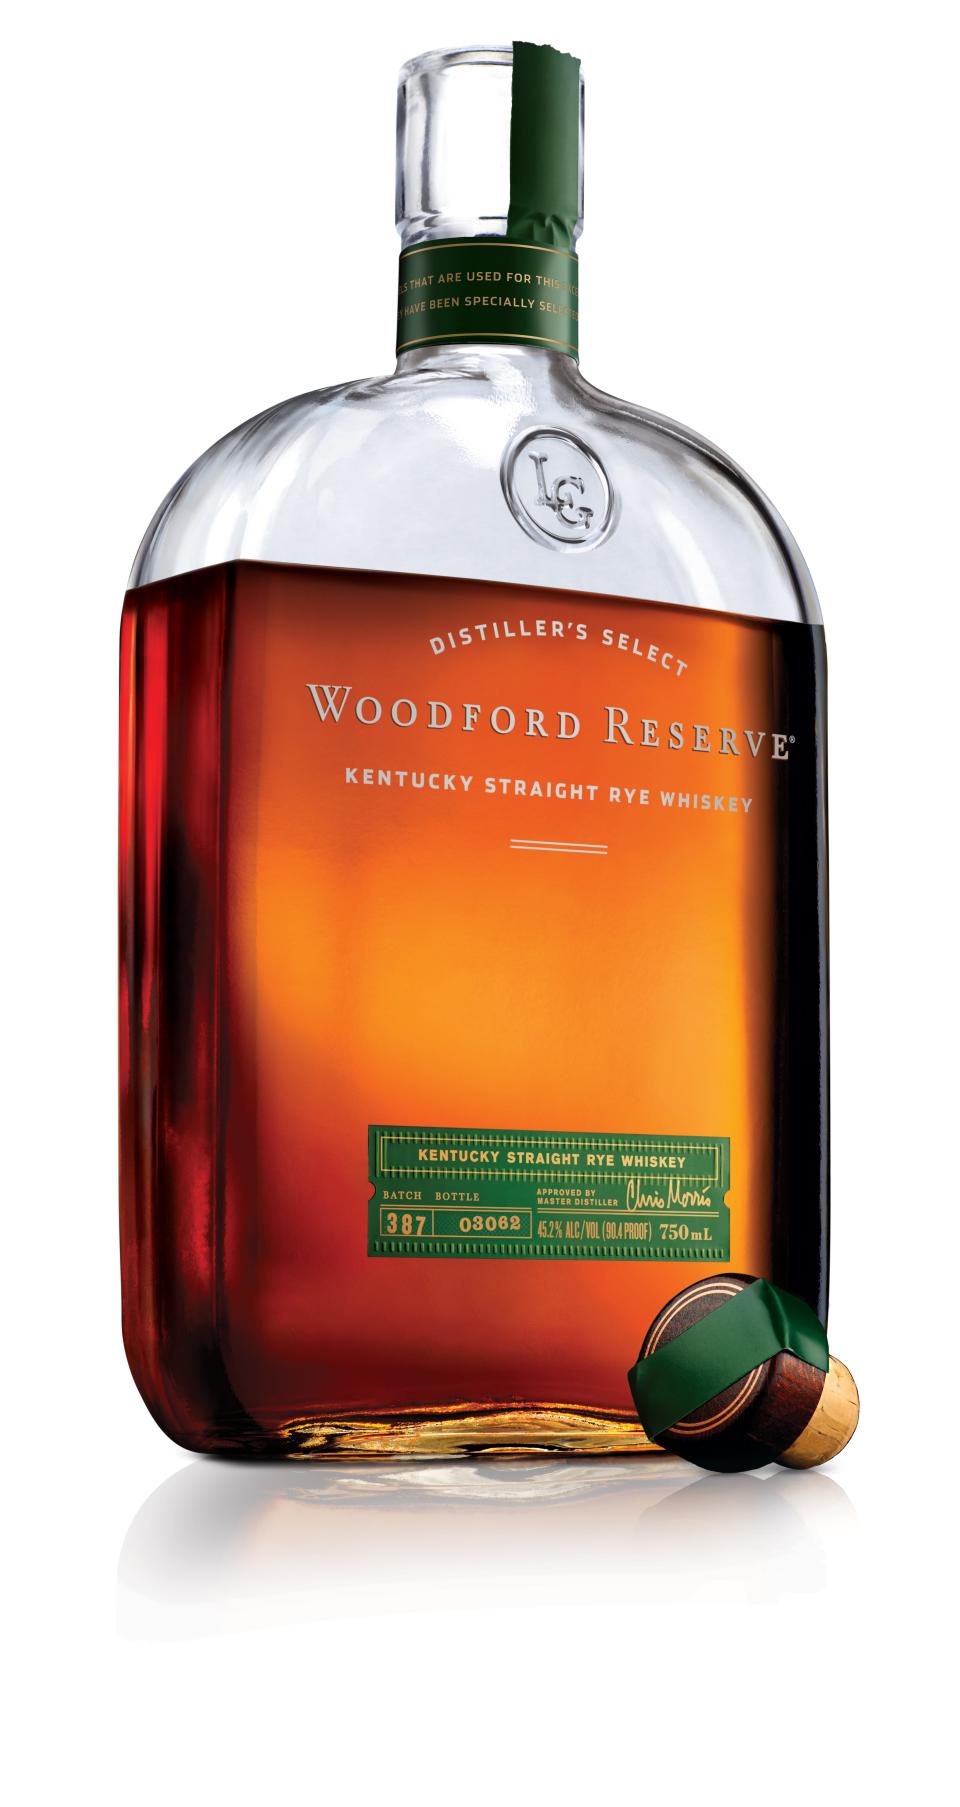 Woodford Reserve Rye is now being offered.